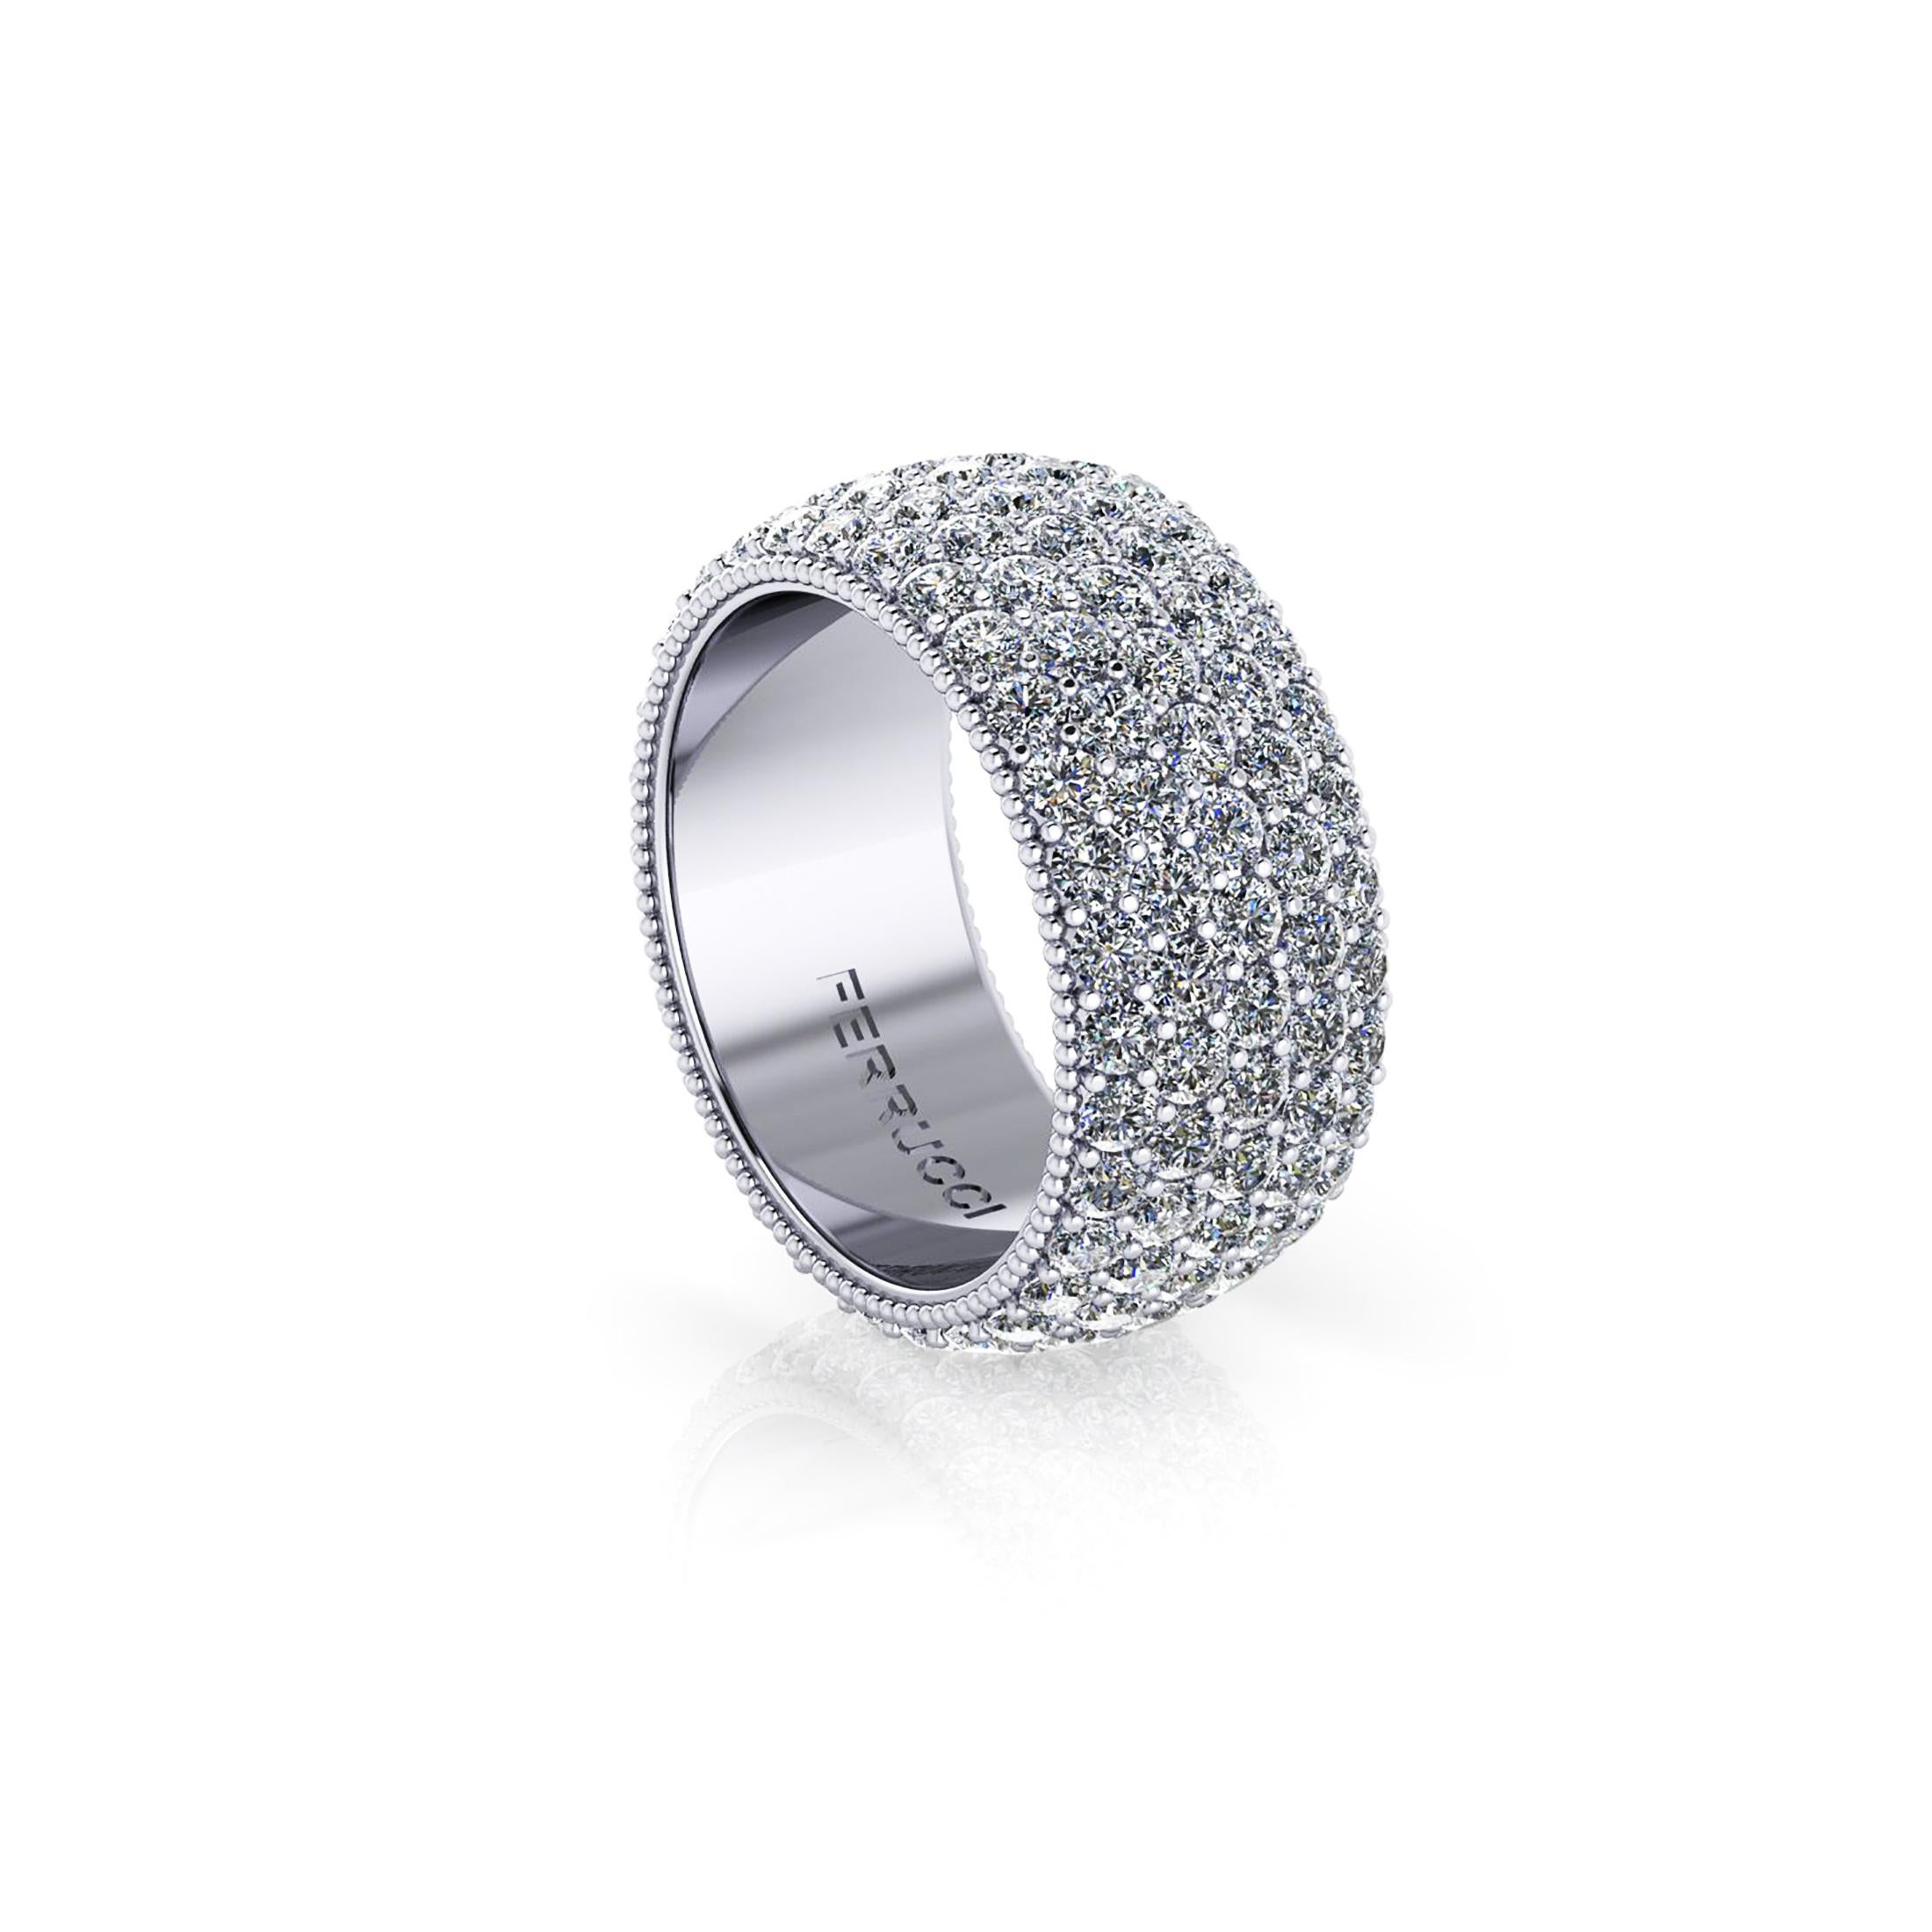 FERRUCCI Wide diamond pave' ring, with a slightly dome feeling, a wrap of sparkling white diamonds, E/F color, VS clarity, for an approximate total carat weight of 4.50 carats, hand made in New York City by hand by  Italian master jeweler, conceived